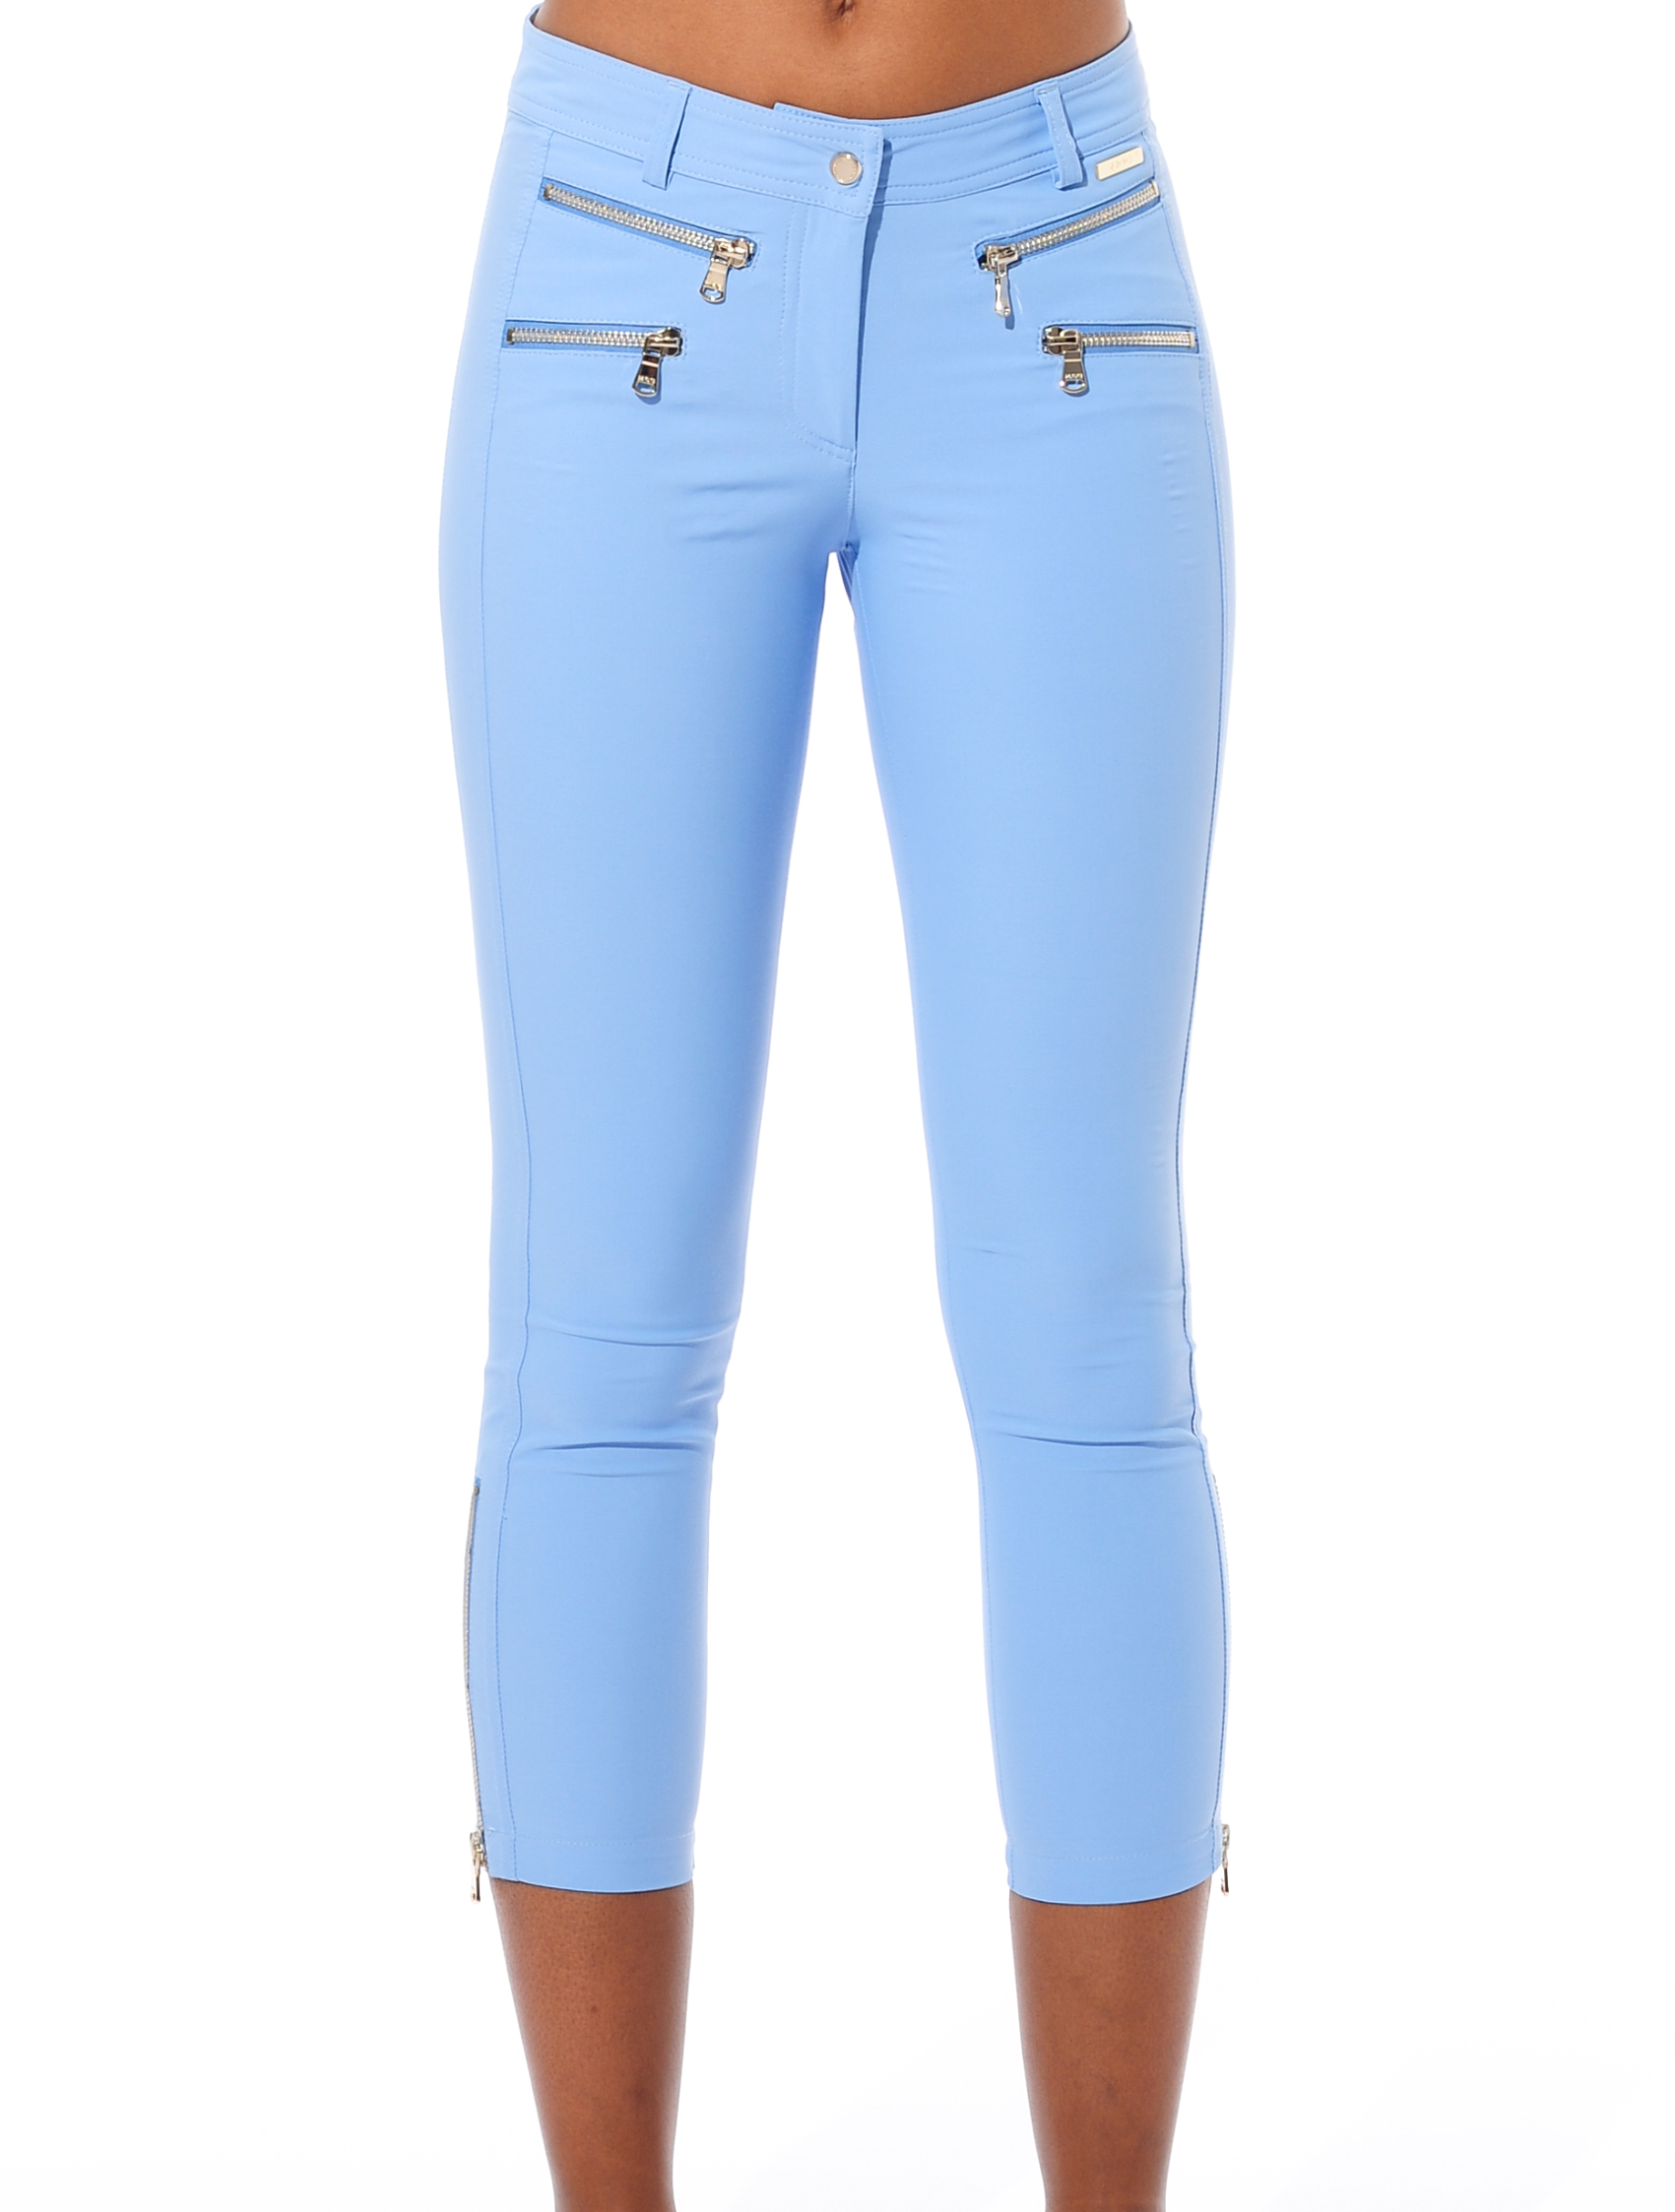 4way stretch double zip cropped pants baby blue 